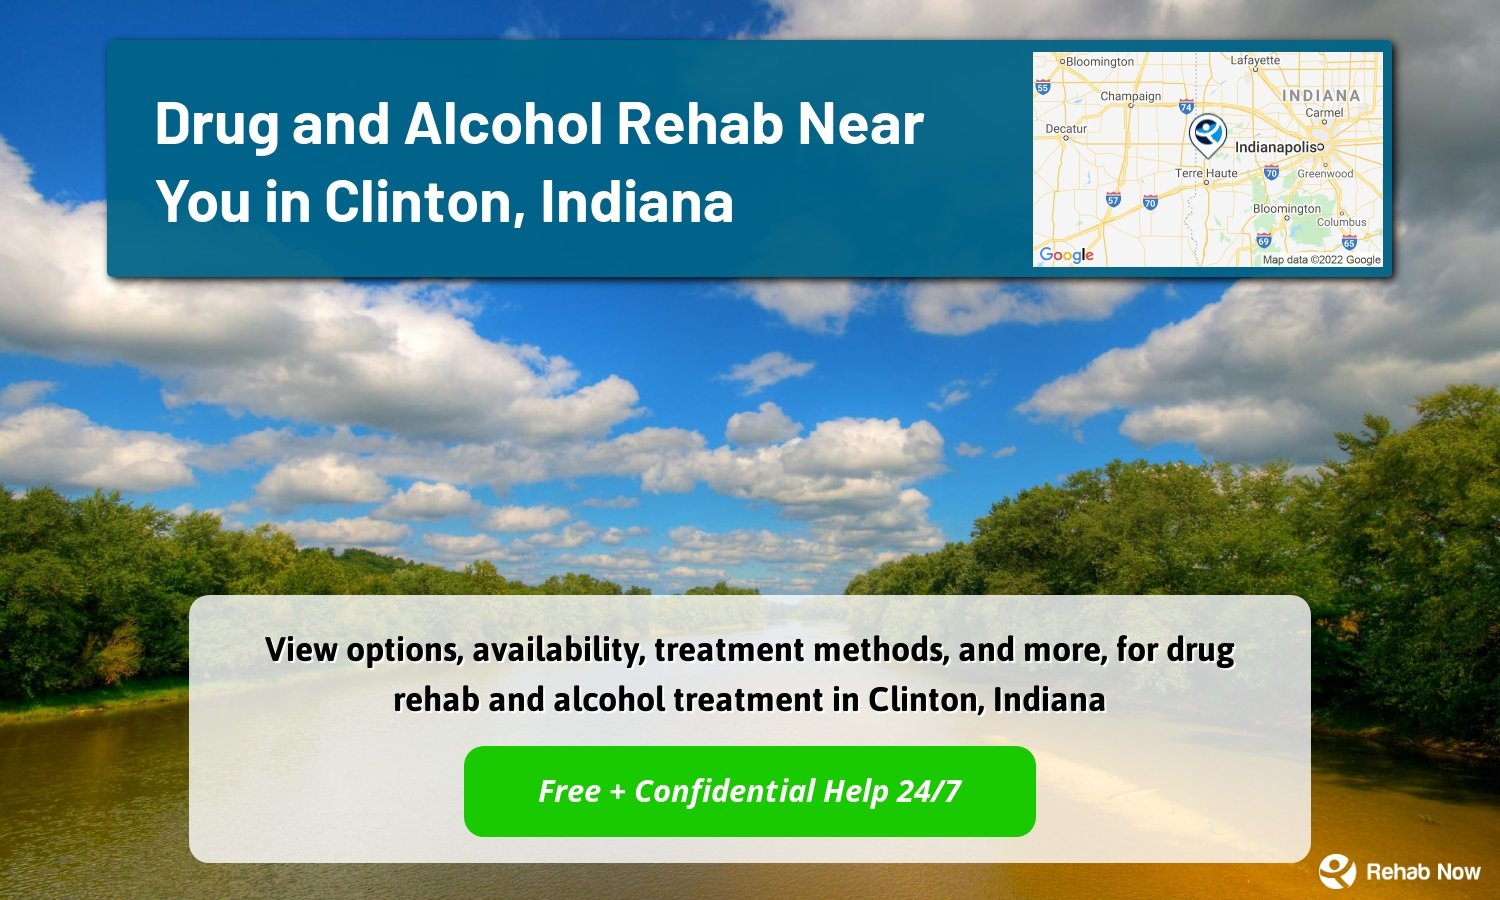 View options, availability, treatment methods, and more, for drug rehab and alcohol treatment in Clinton, Indiana